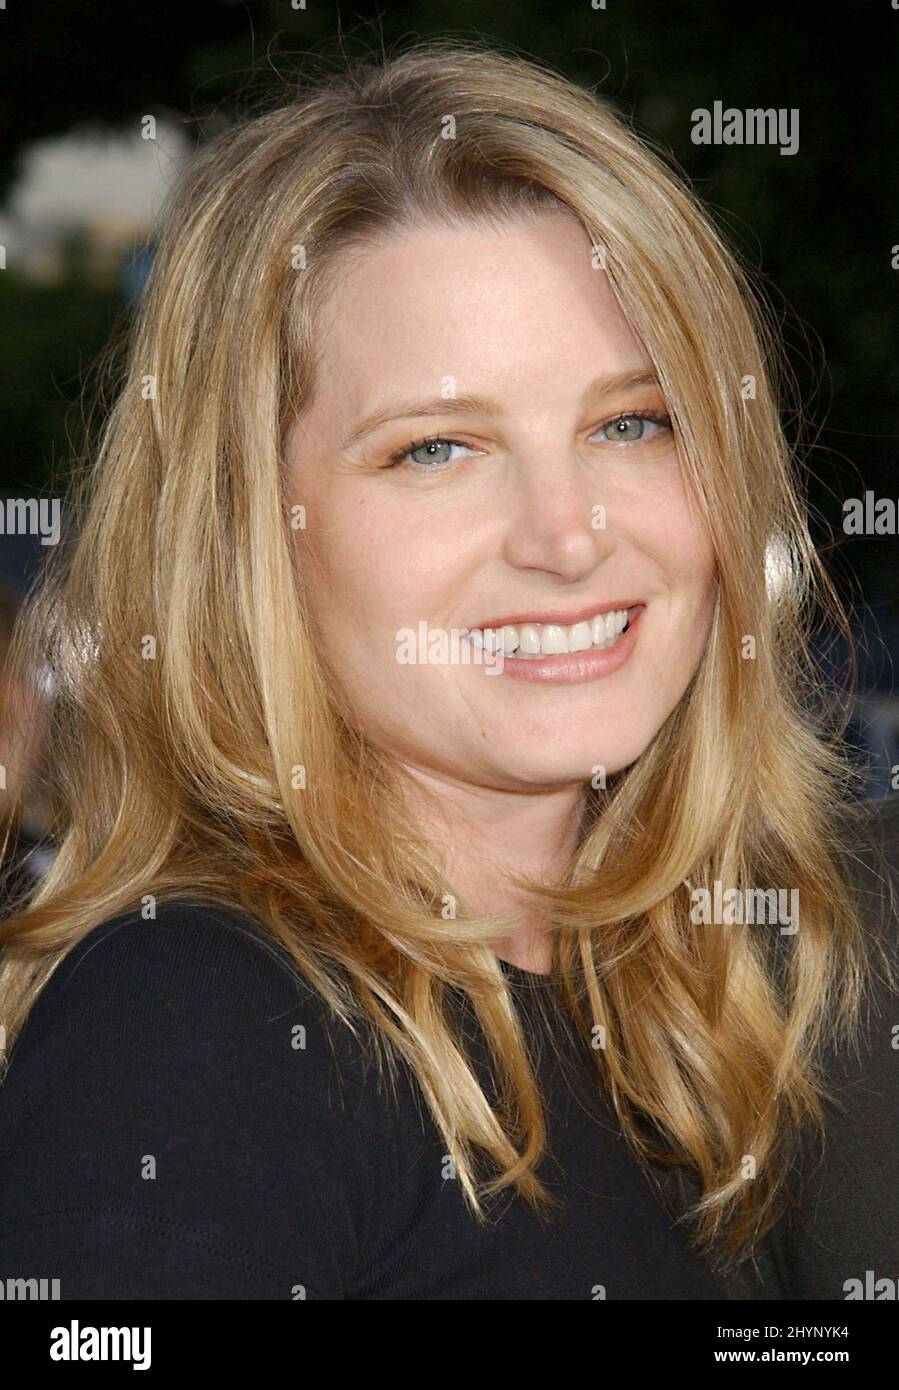 BRIDGET FONDA ATTENDS THE 'SEABISCUIT' FILM PREMIERE IN HOLLYWOOD. PICTURE: UK PRESS Stock Photo